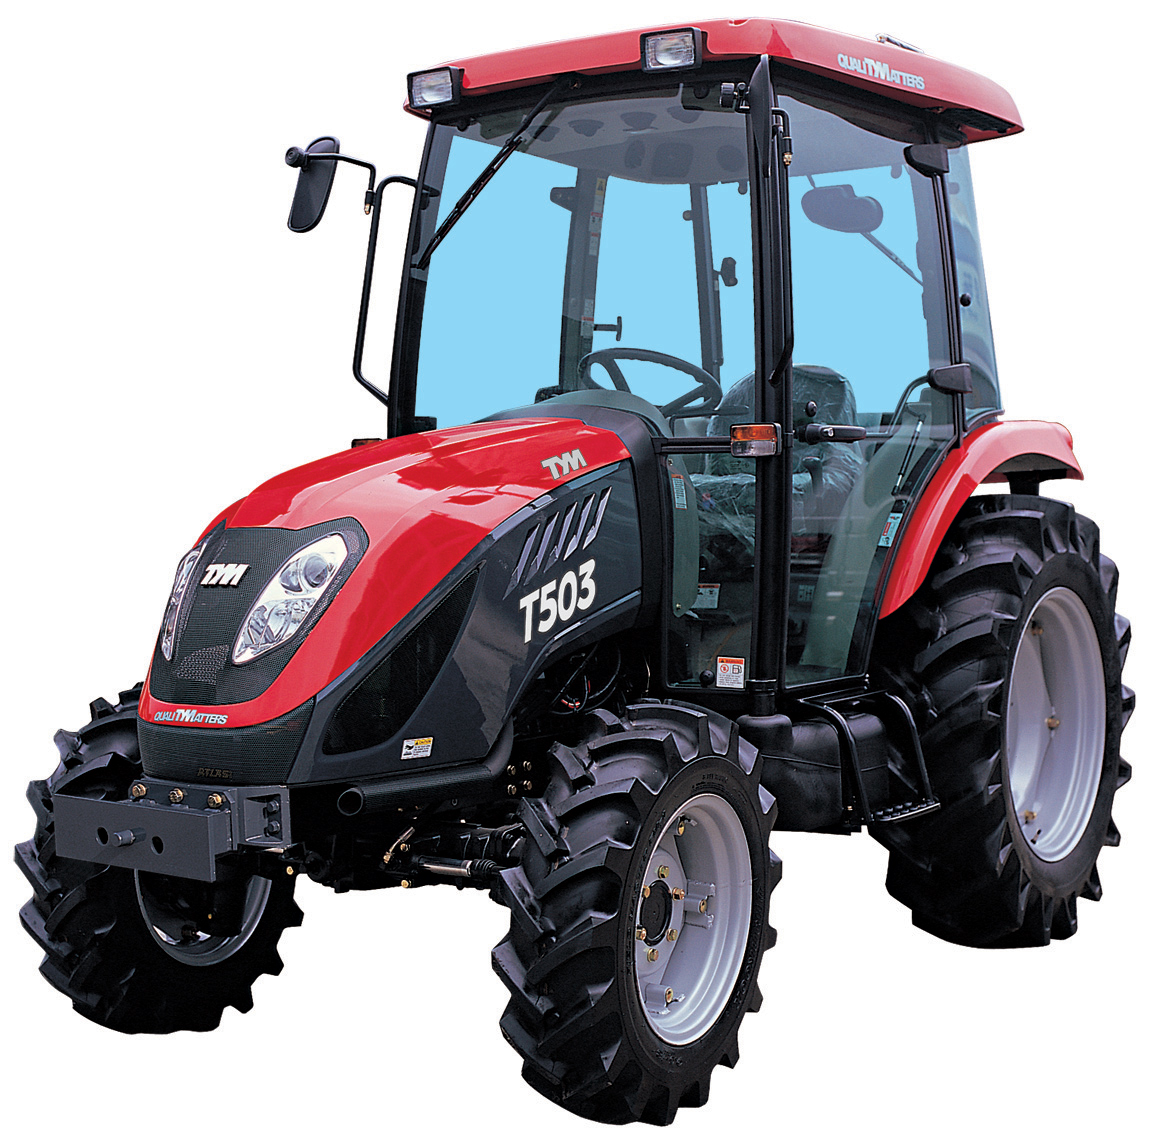 T503 compact tractor with agricultural tires and a heated air ...